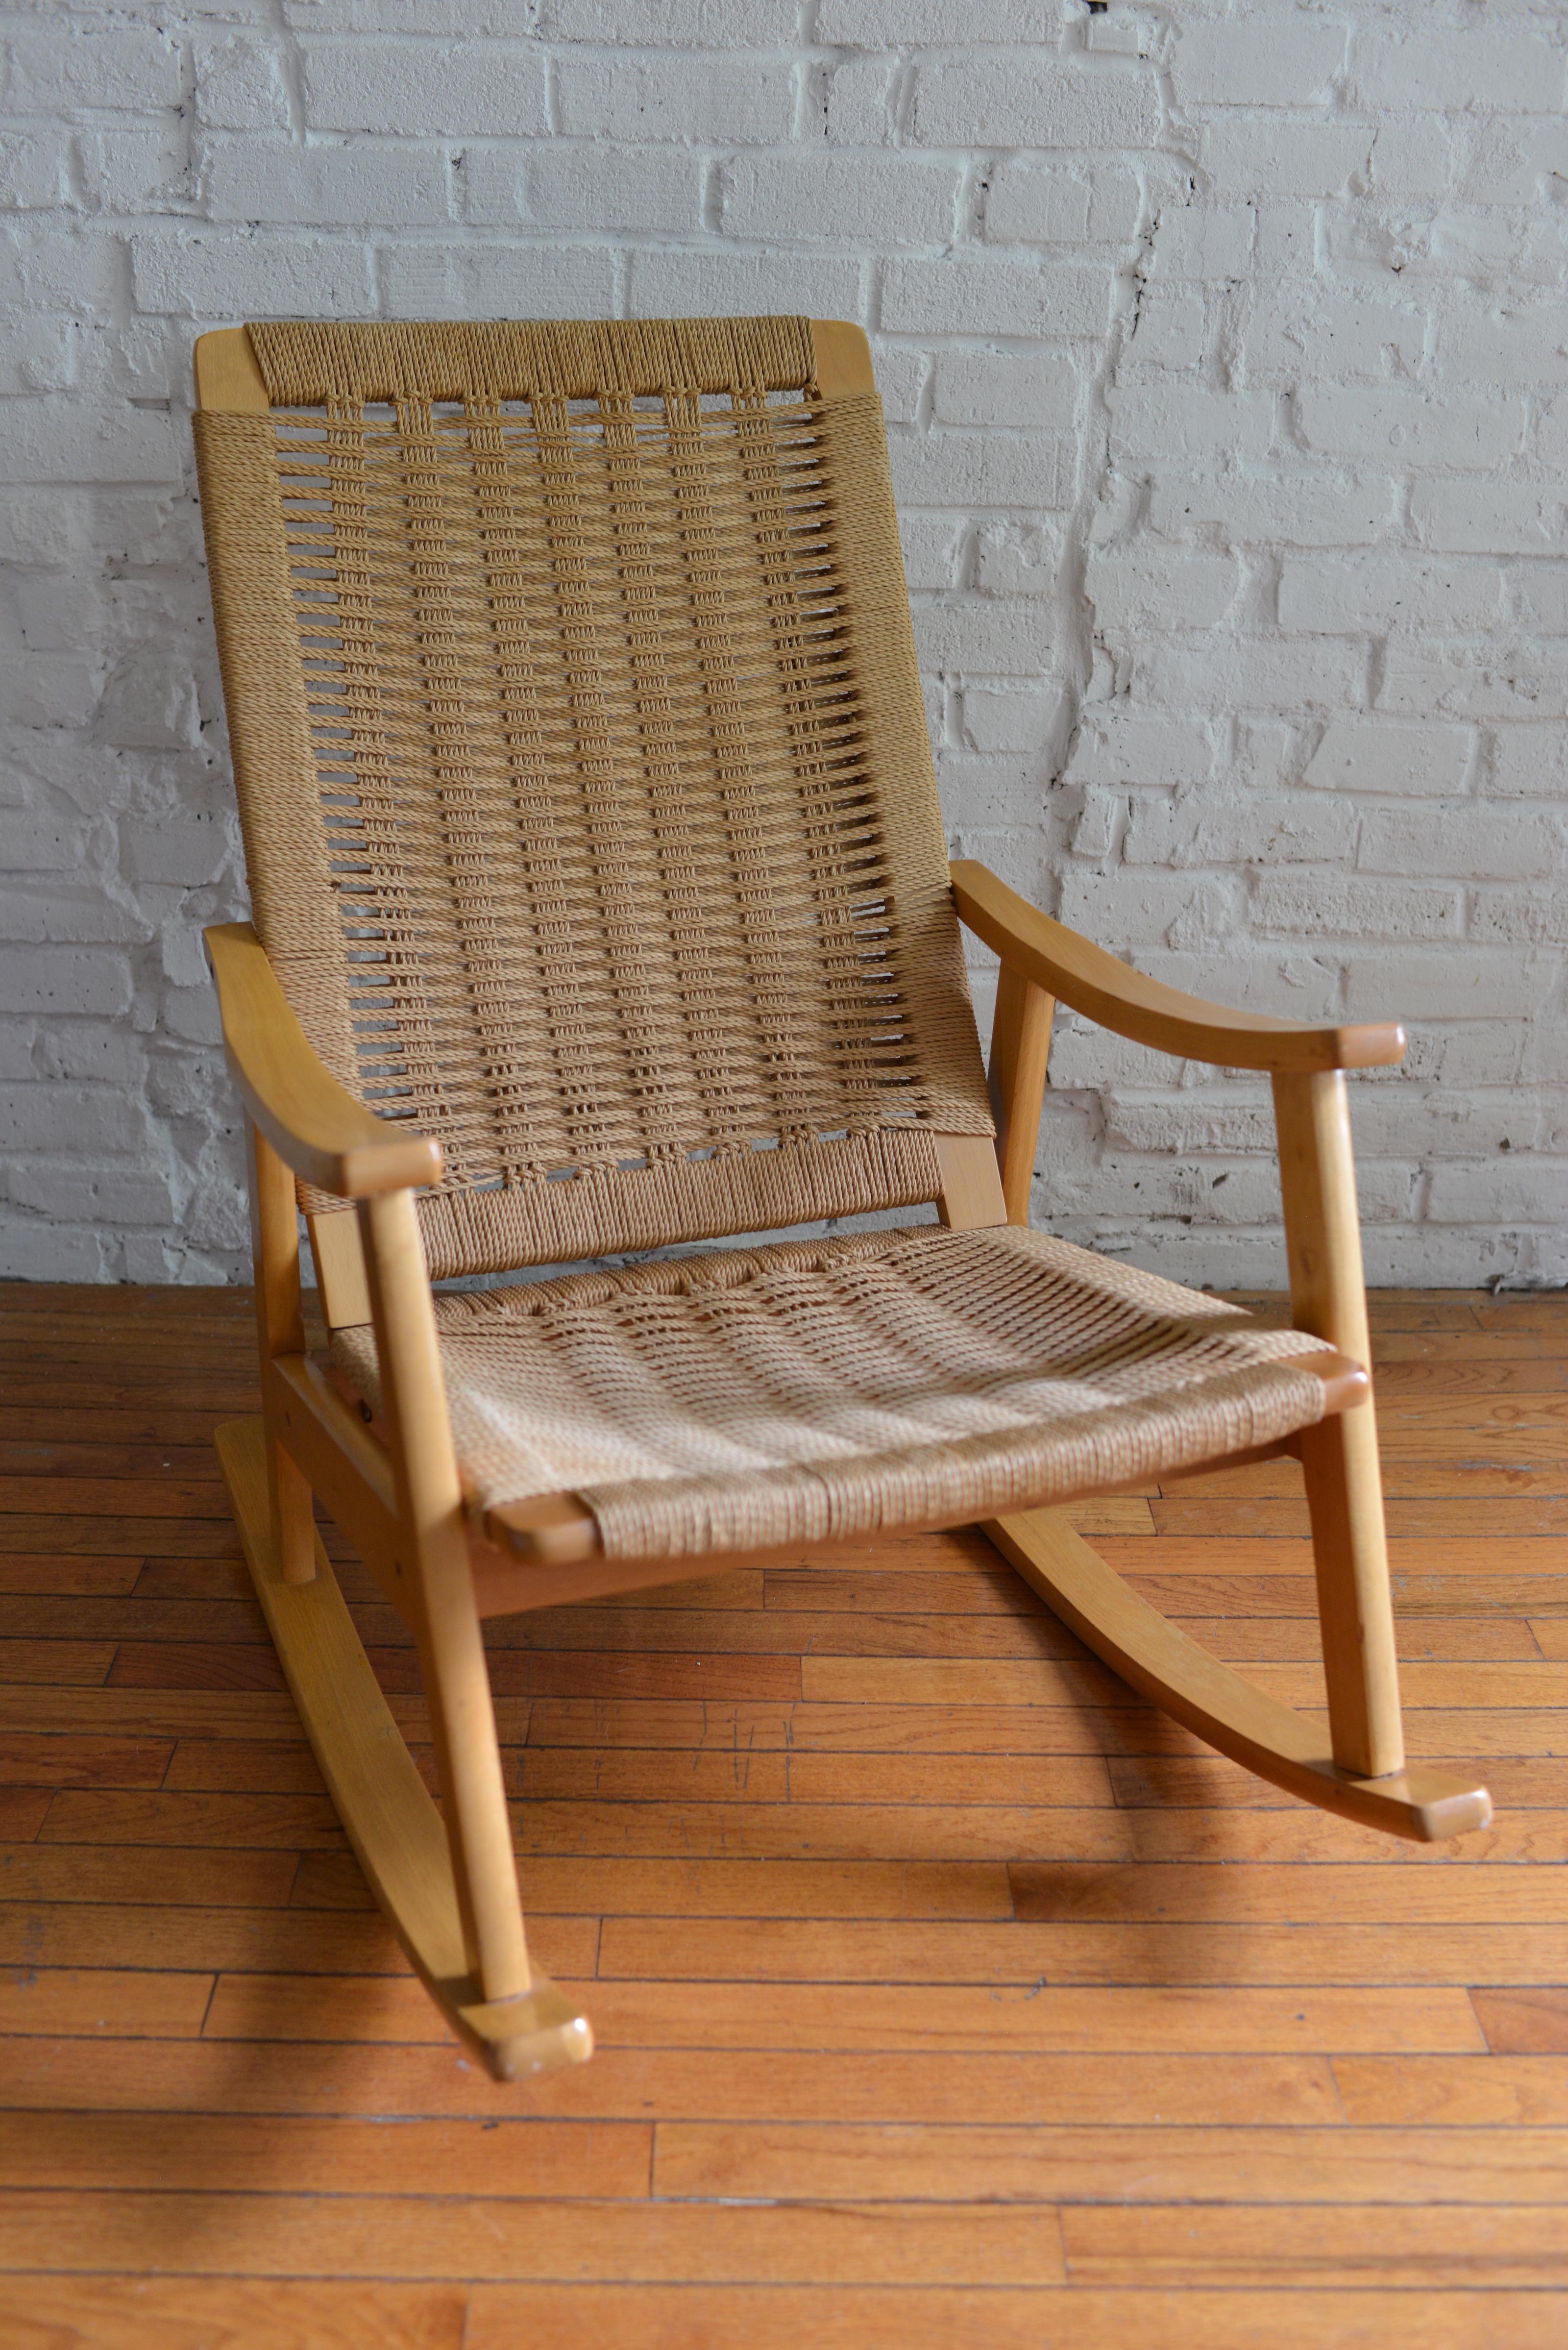 Classic twisted rope mid-century modern rocking chair. Designed in the style of Hans Wegner and made in Yugoslavia. Extremely comfortable and in great condition.

Dimensions: 25 1/2ʺW x 33ʺD x 36ʺH
Time Period/Year: Mid 20th Century 